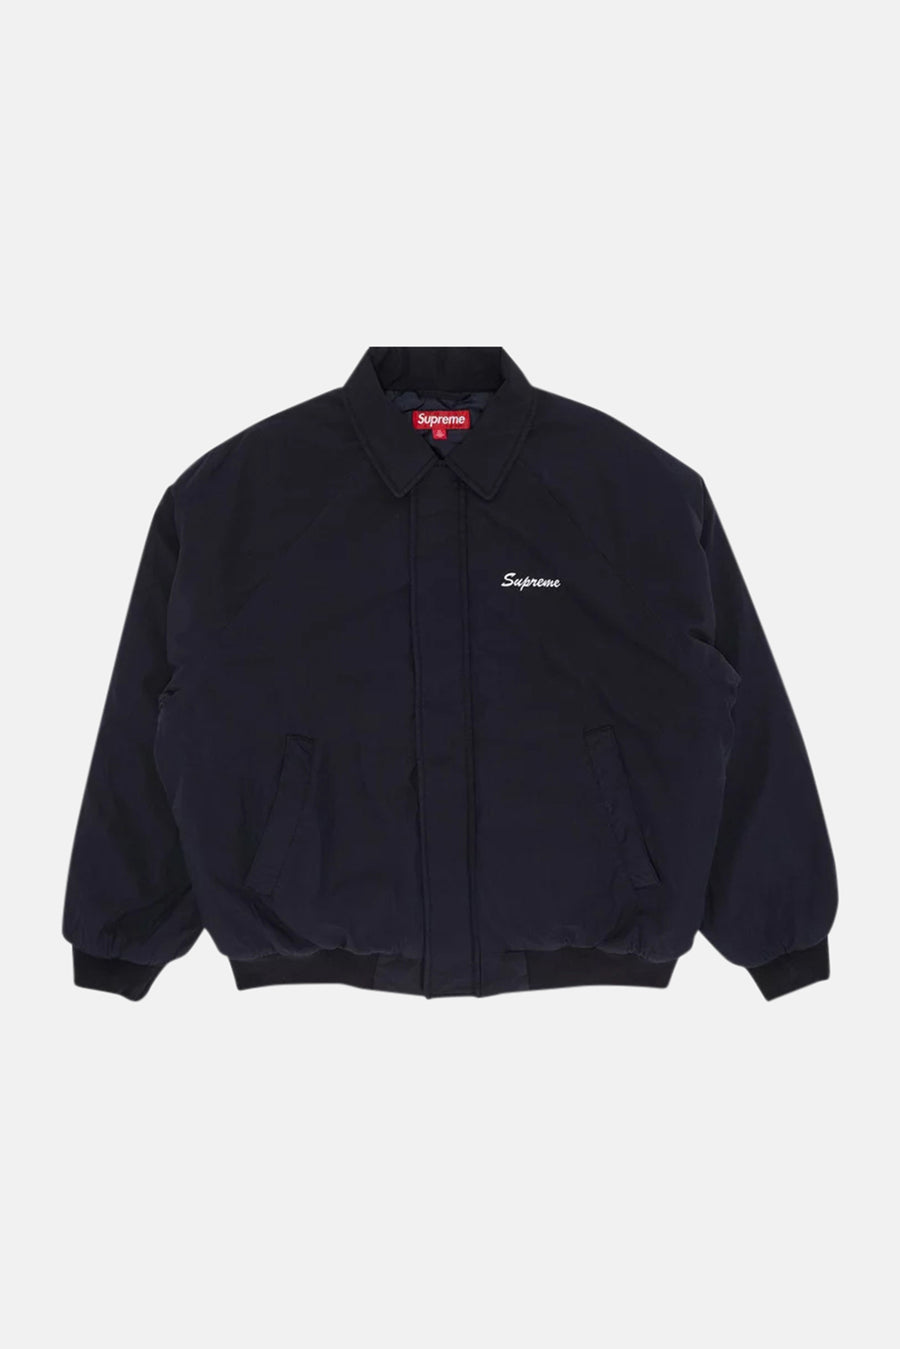 Peace Embroidered Work Jacket Navy